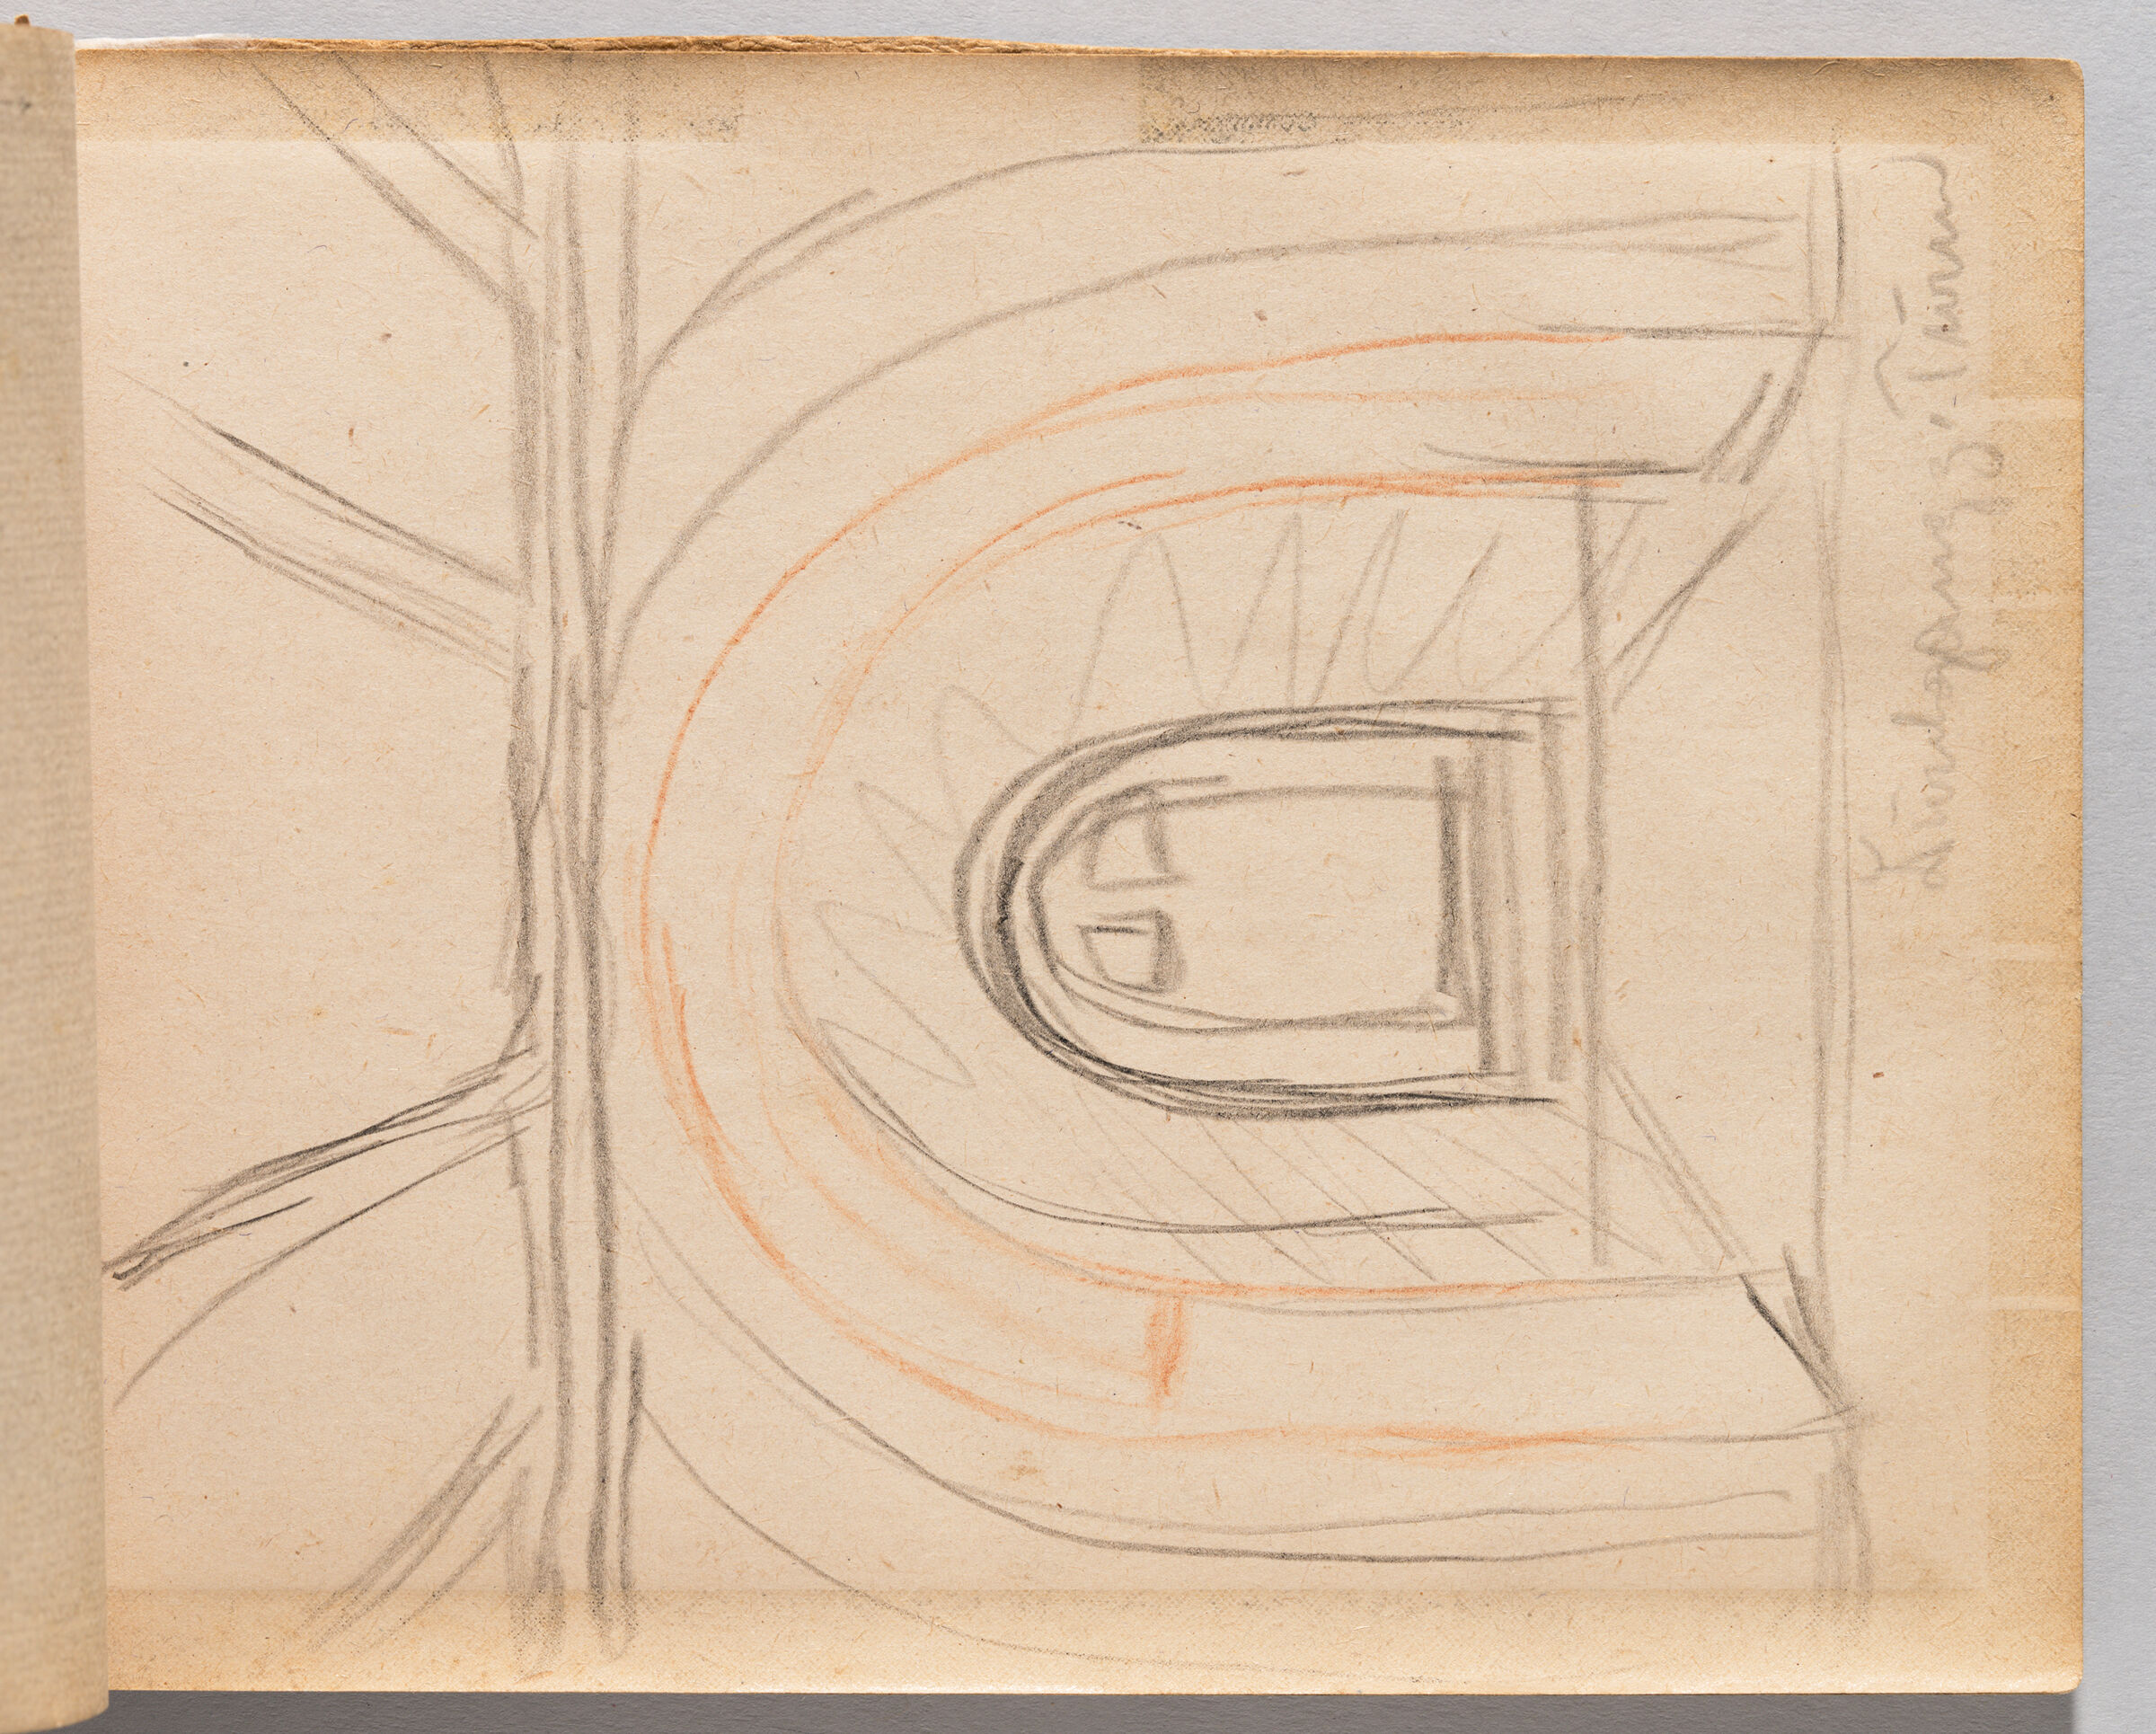 Untitled (Blank, Left Page); Untitled (Architectural Sketch, Right Page)